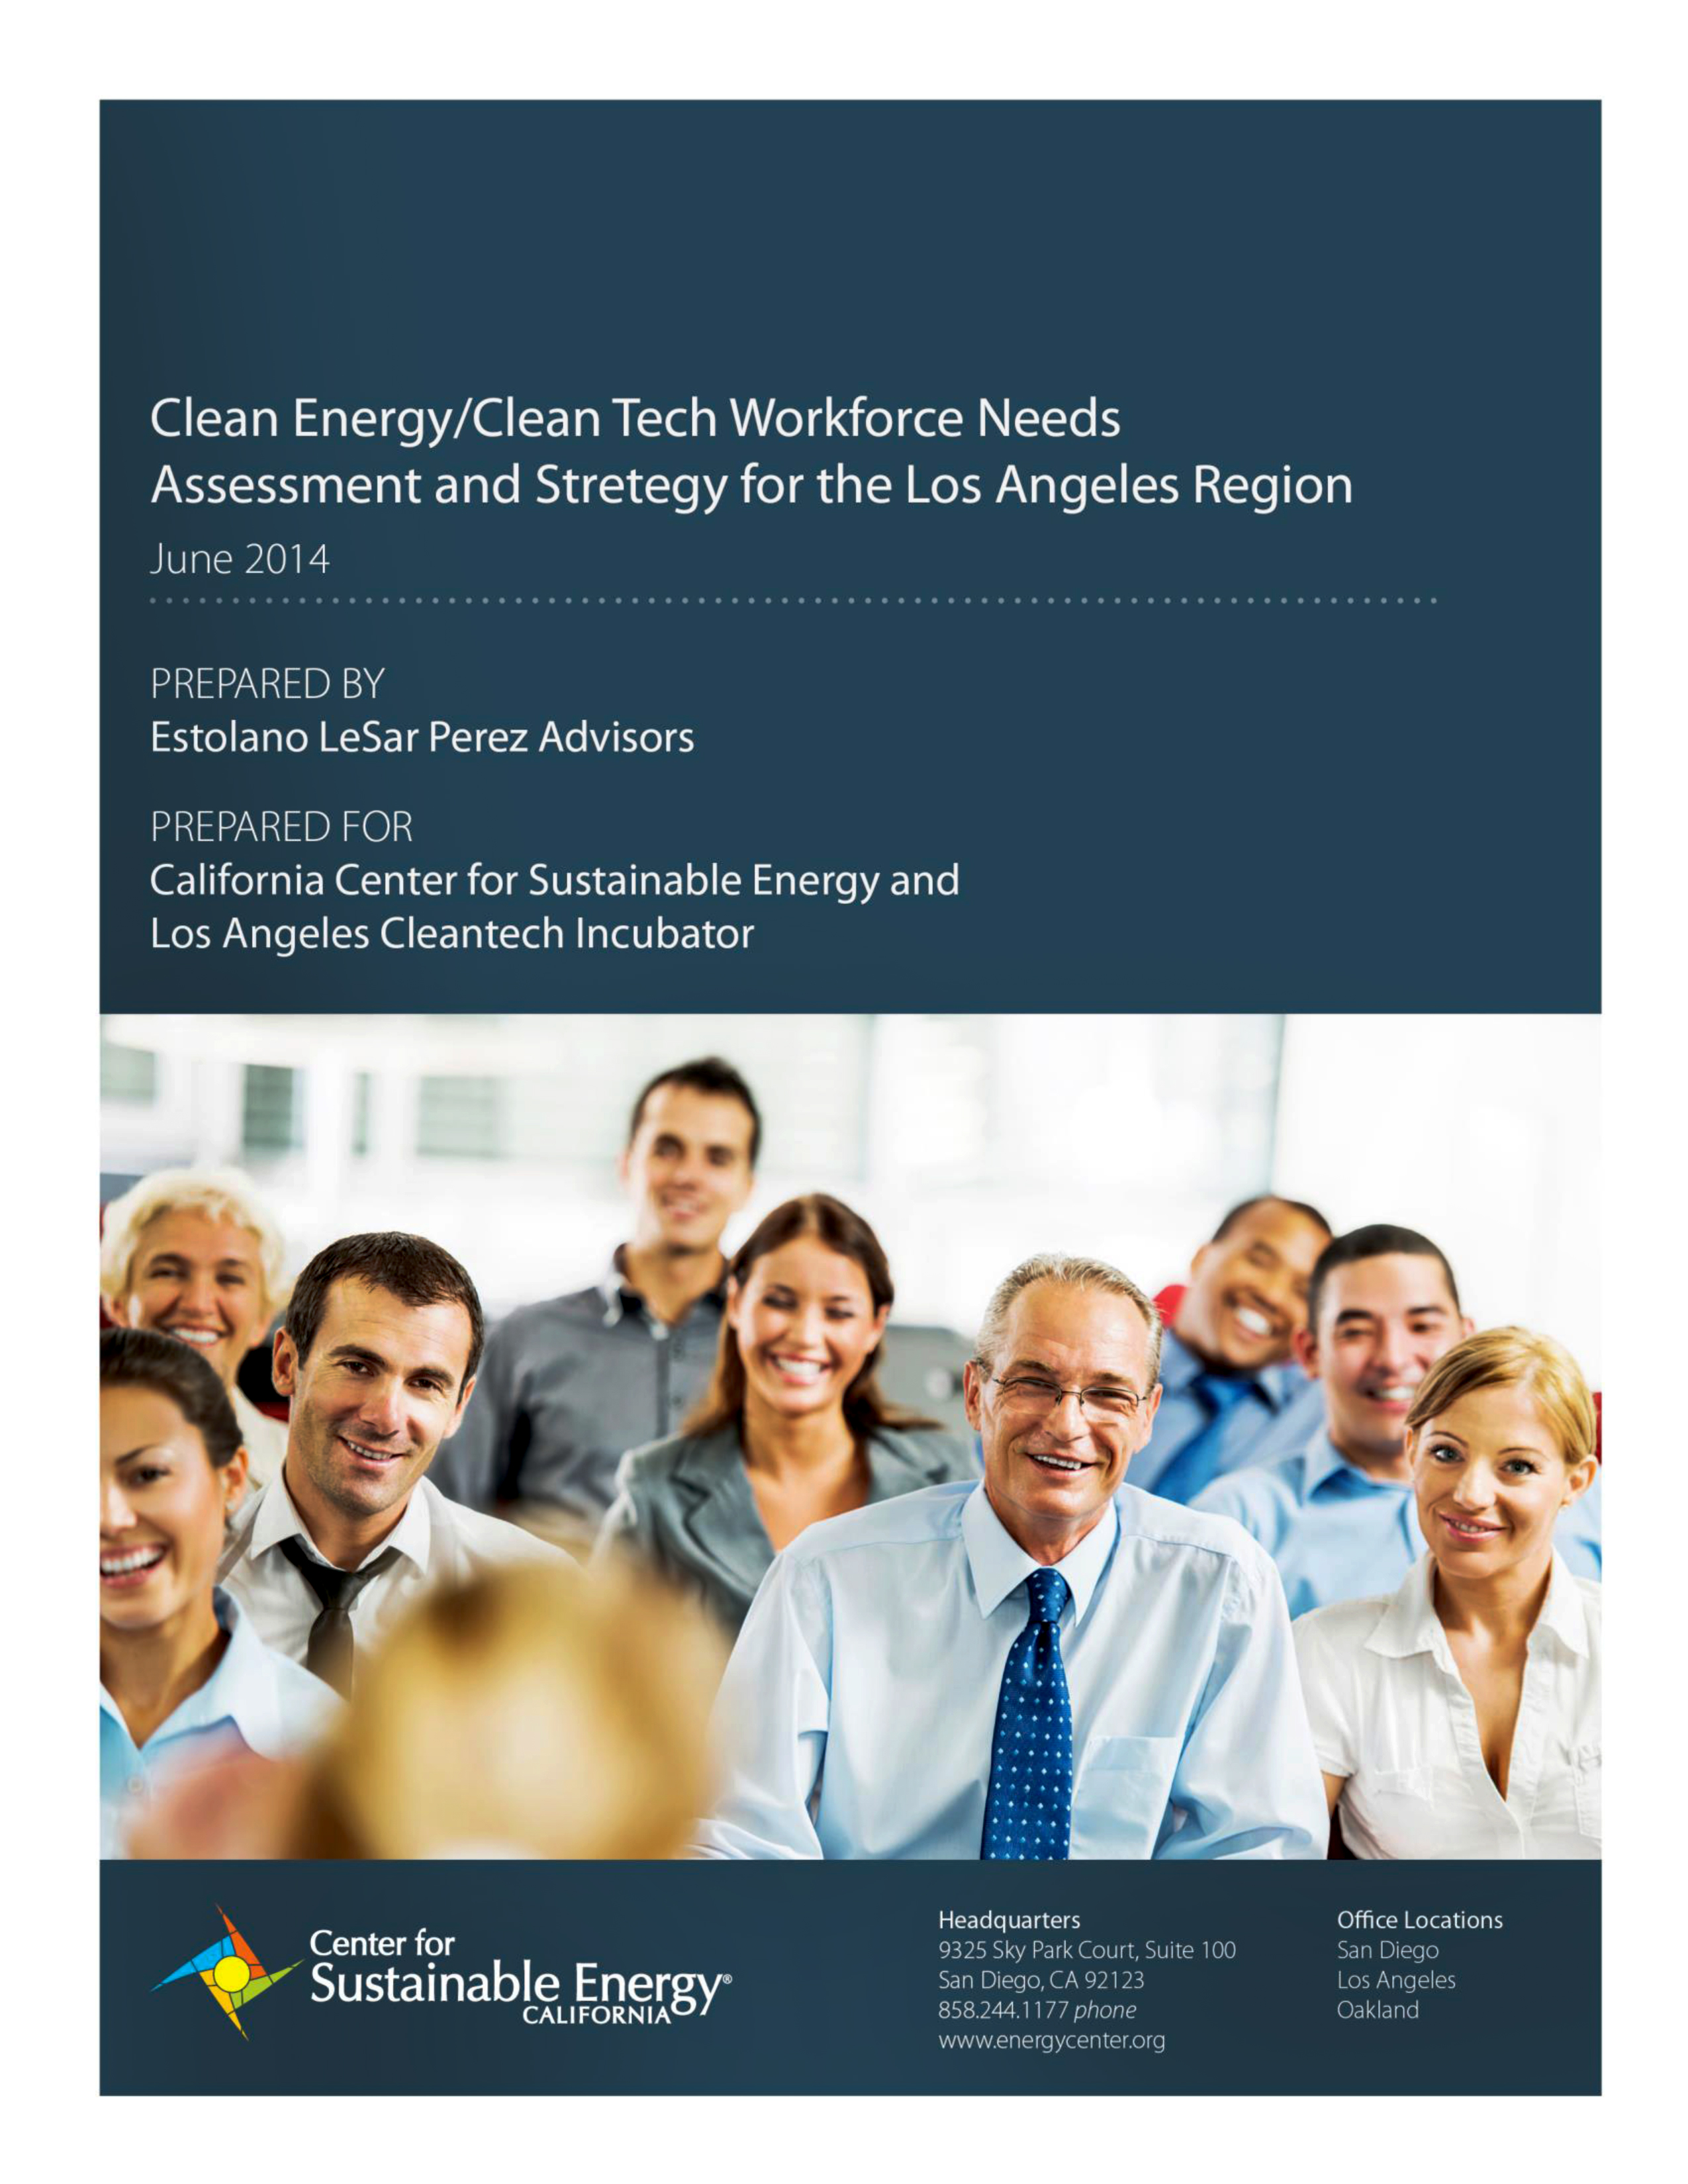 Cover of Los Angeles clean-tech workforce report